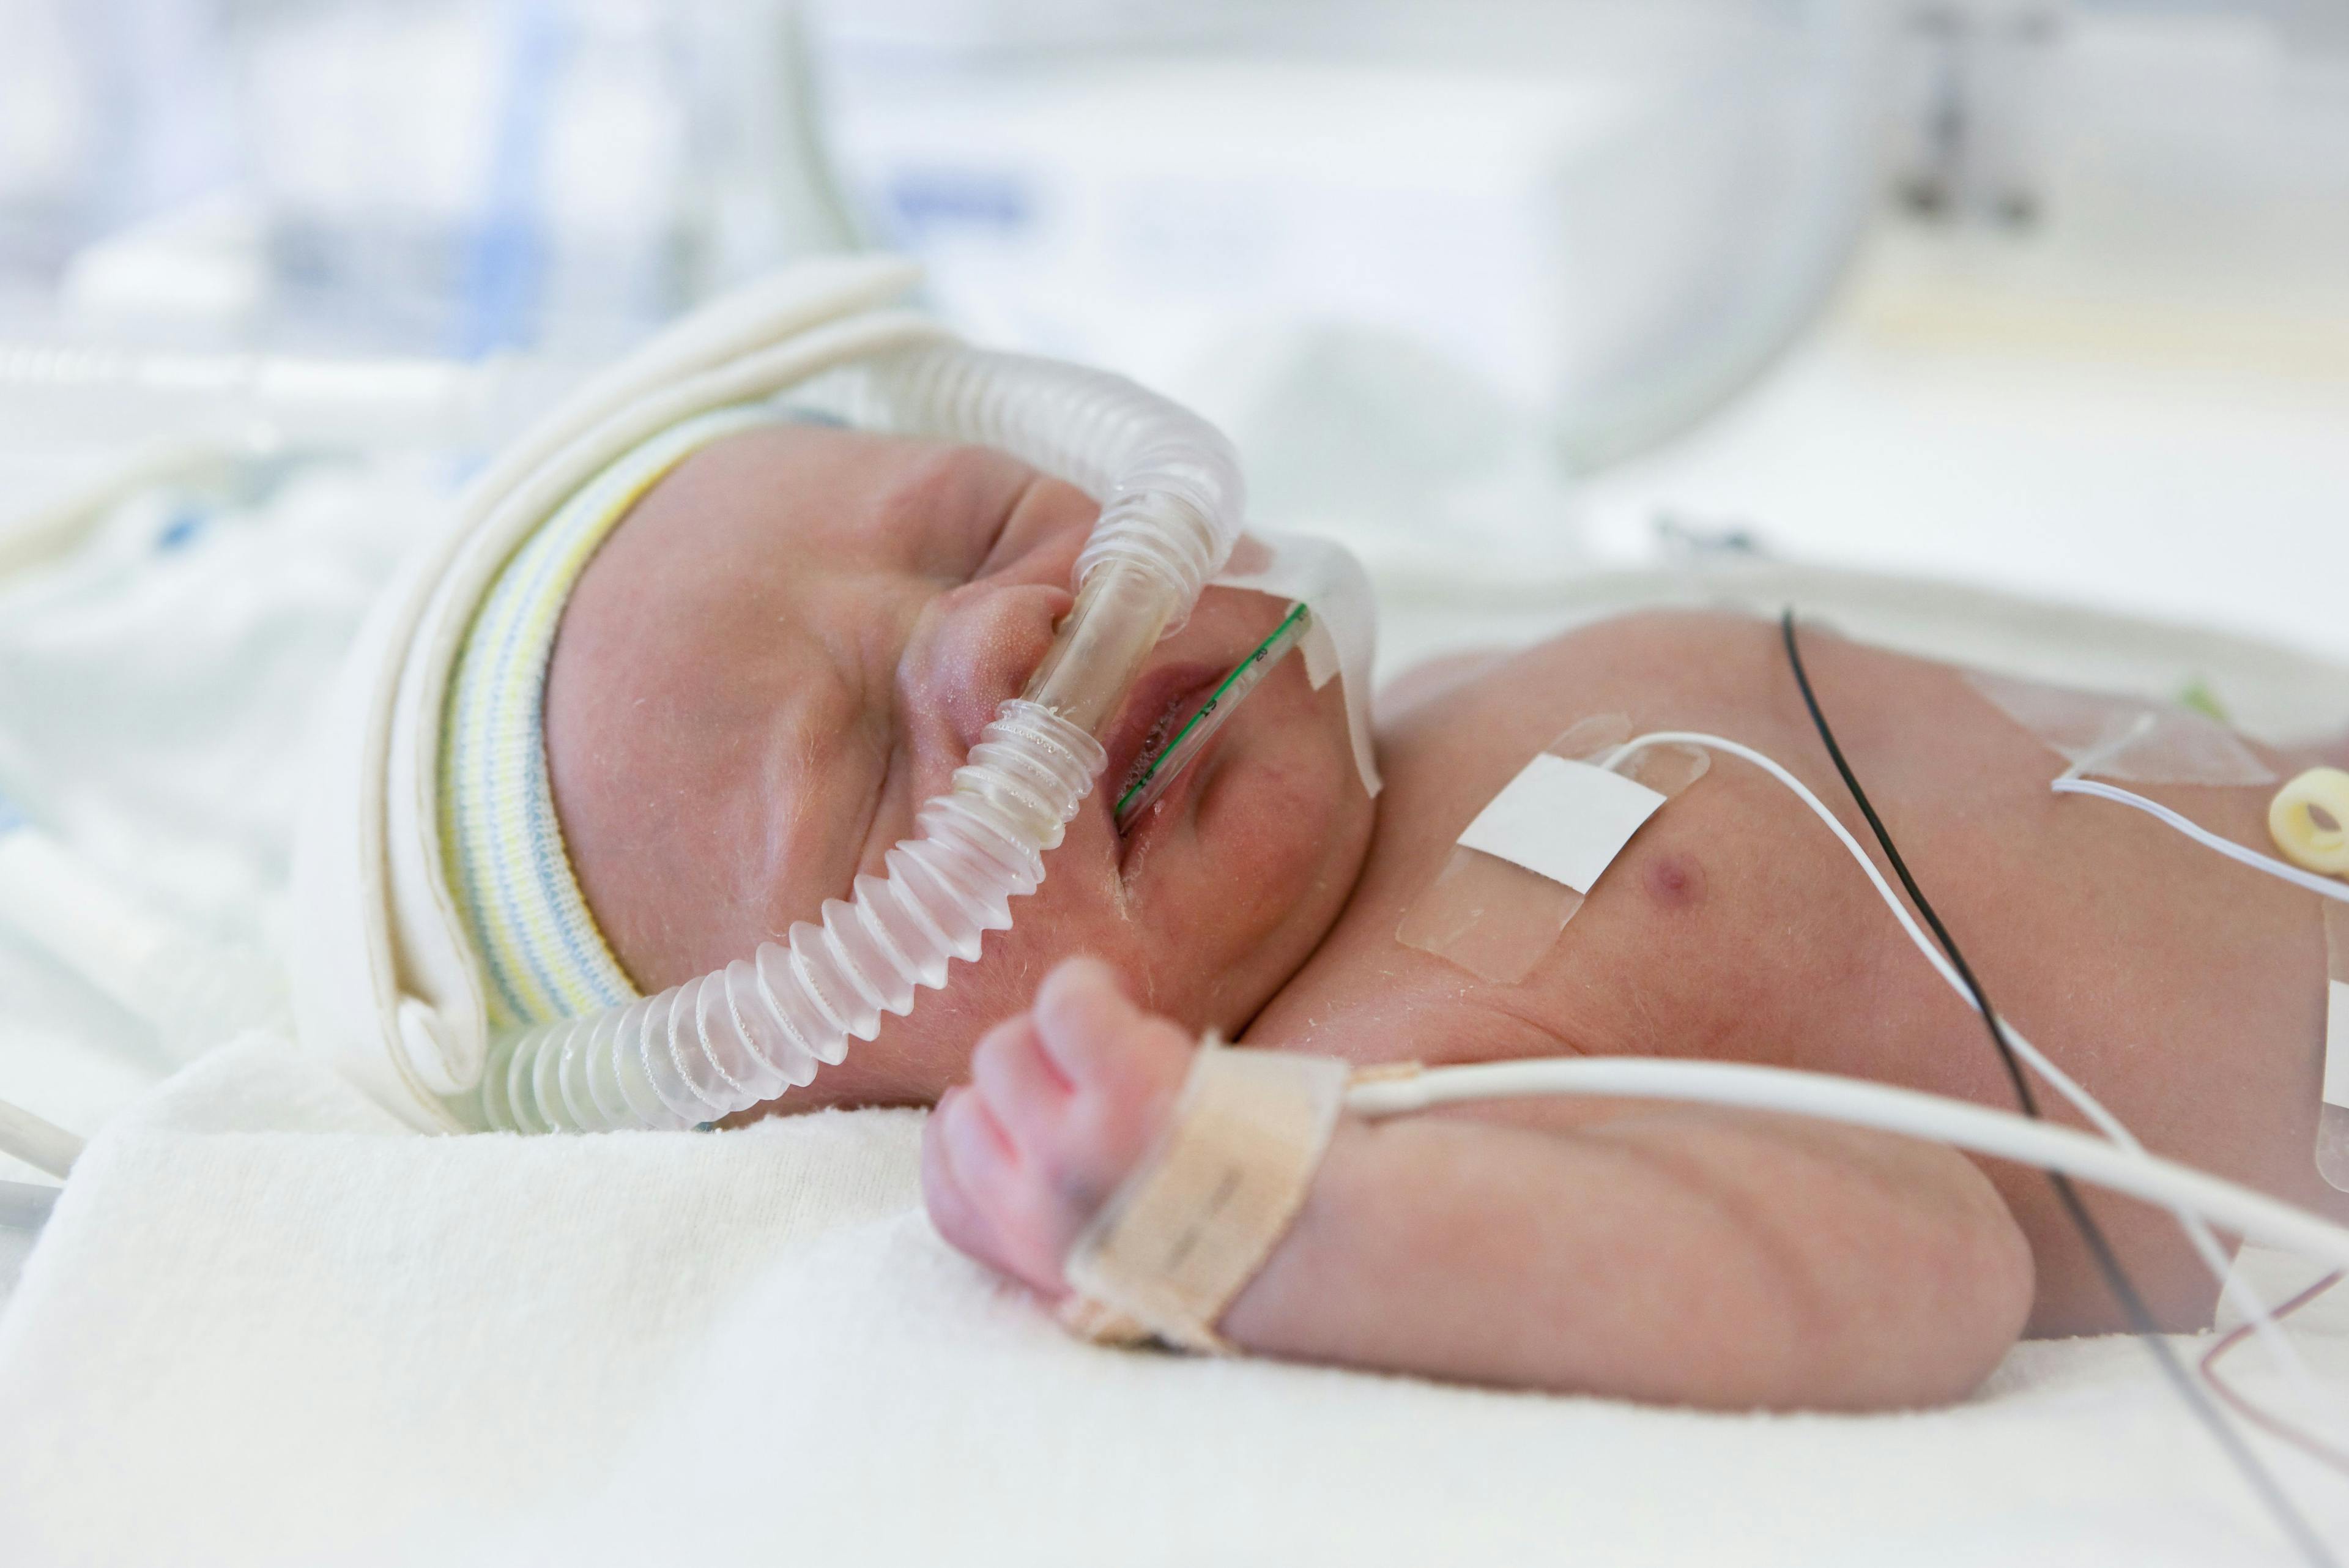 Can you guess the U.S. preterm birth rate?